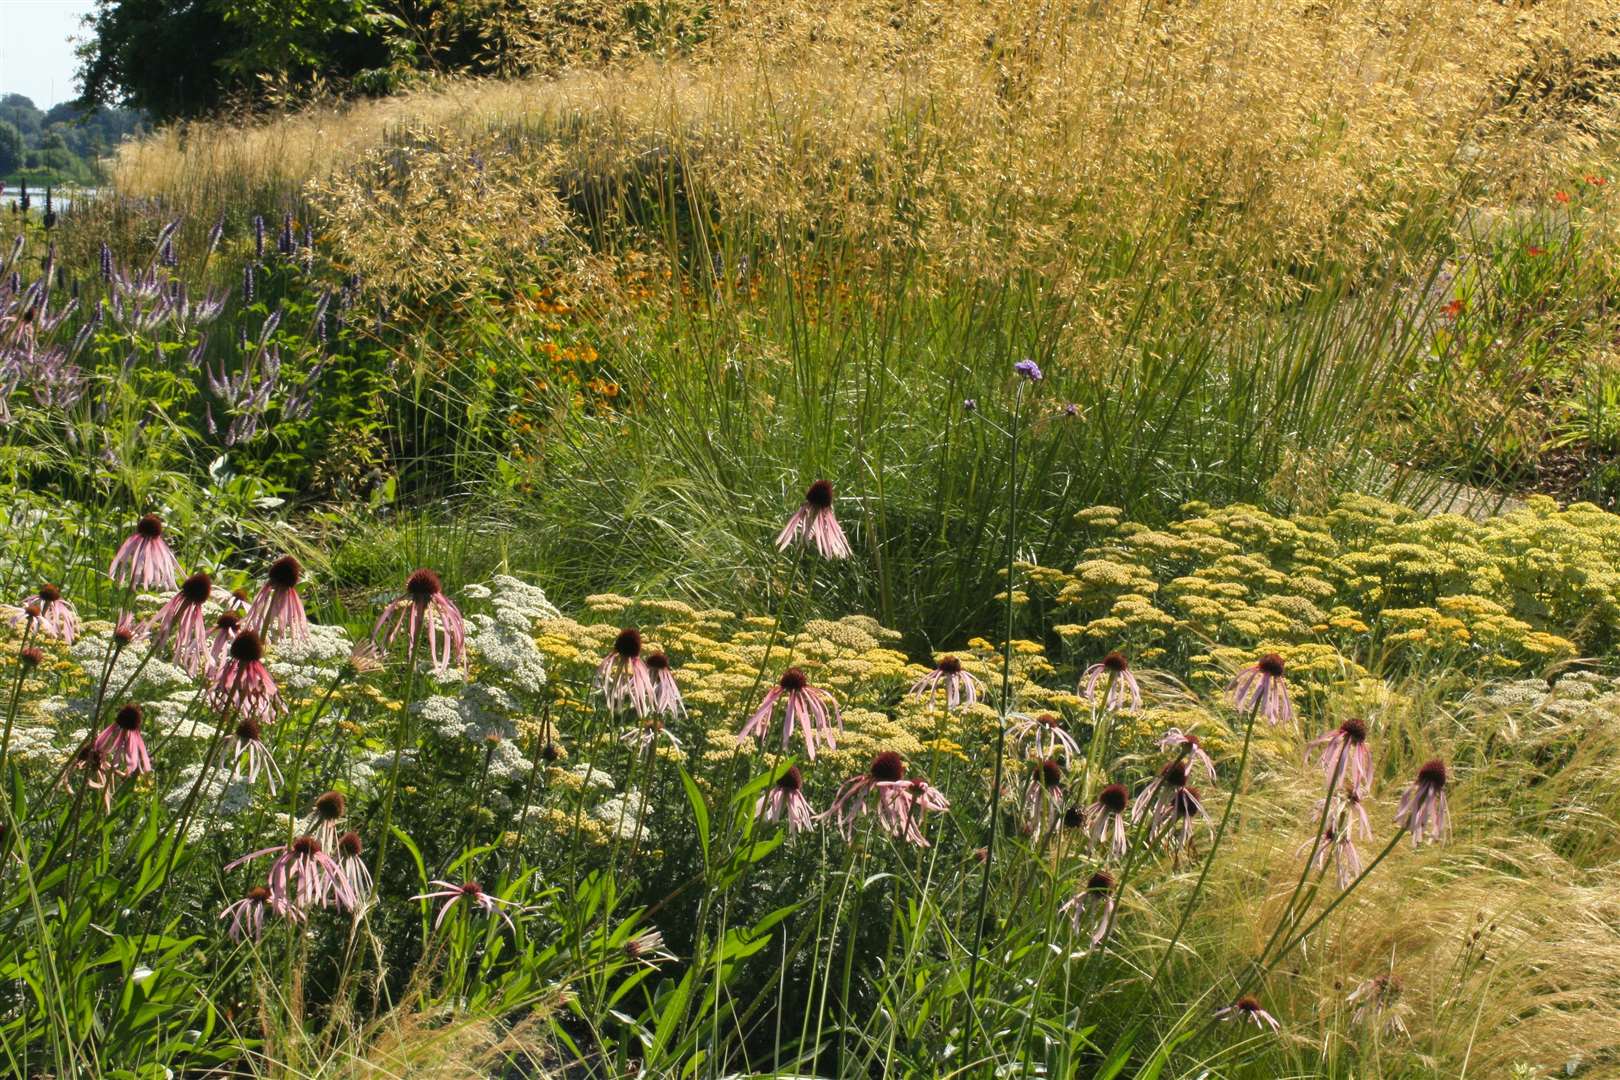 Echinacea pallida’ Hula Dancer’ planted among the grasses in Faith's Garden